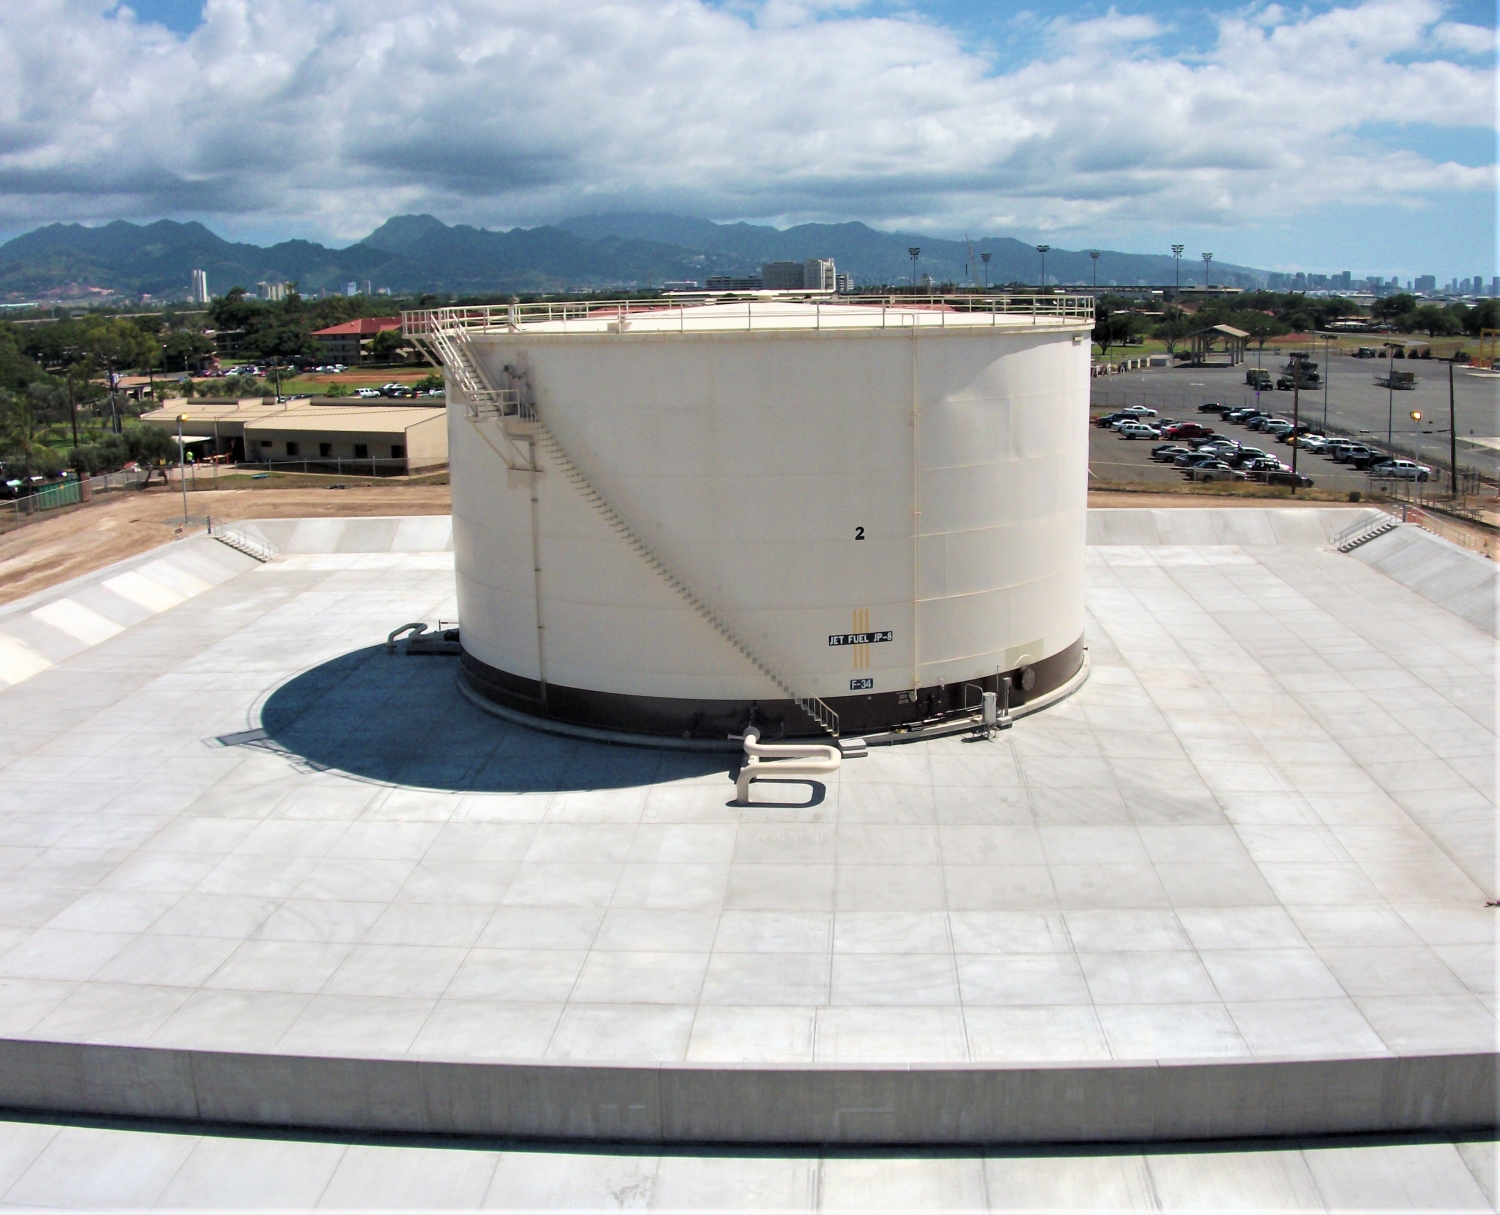 The complete Fuel Storage System at the Hickam Air Force Base